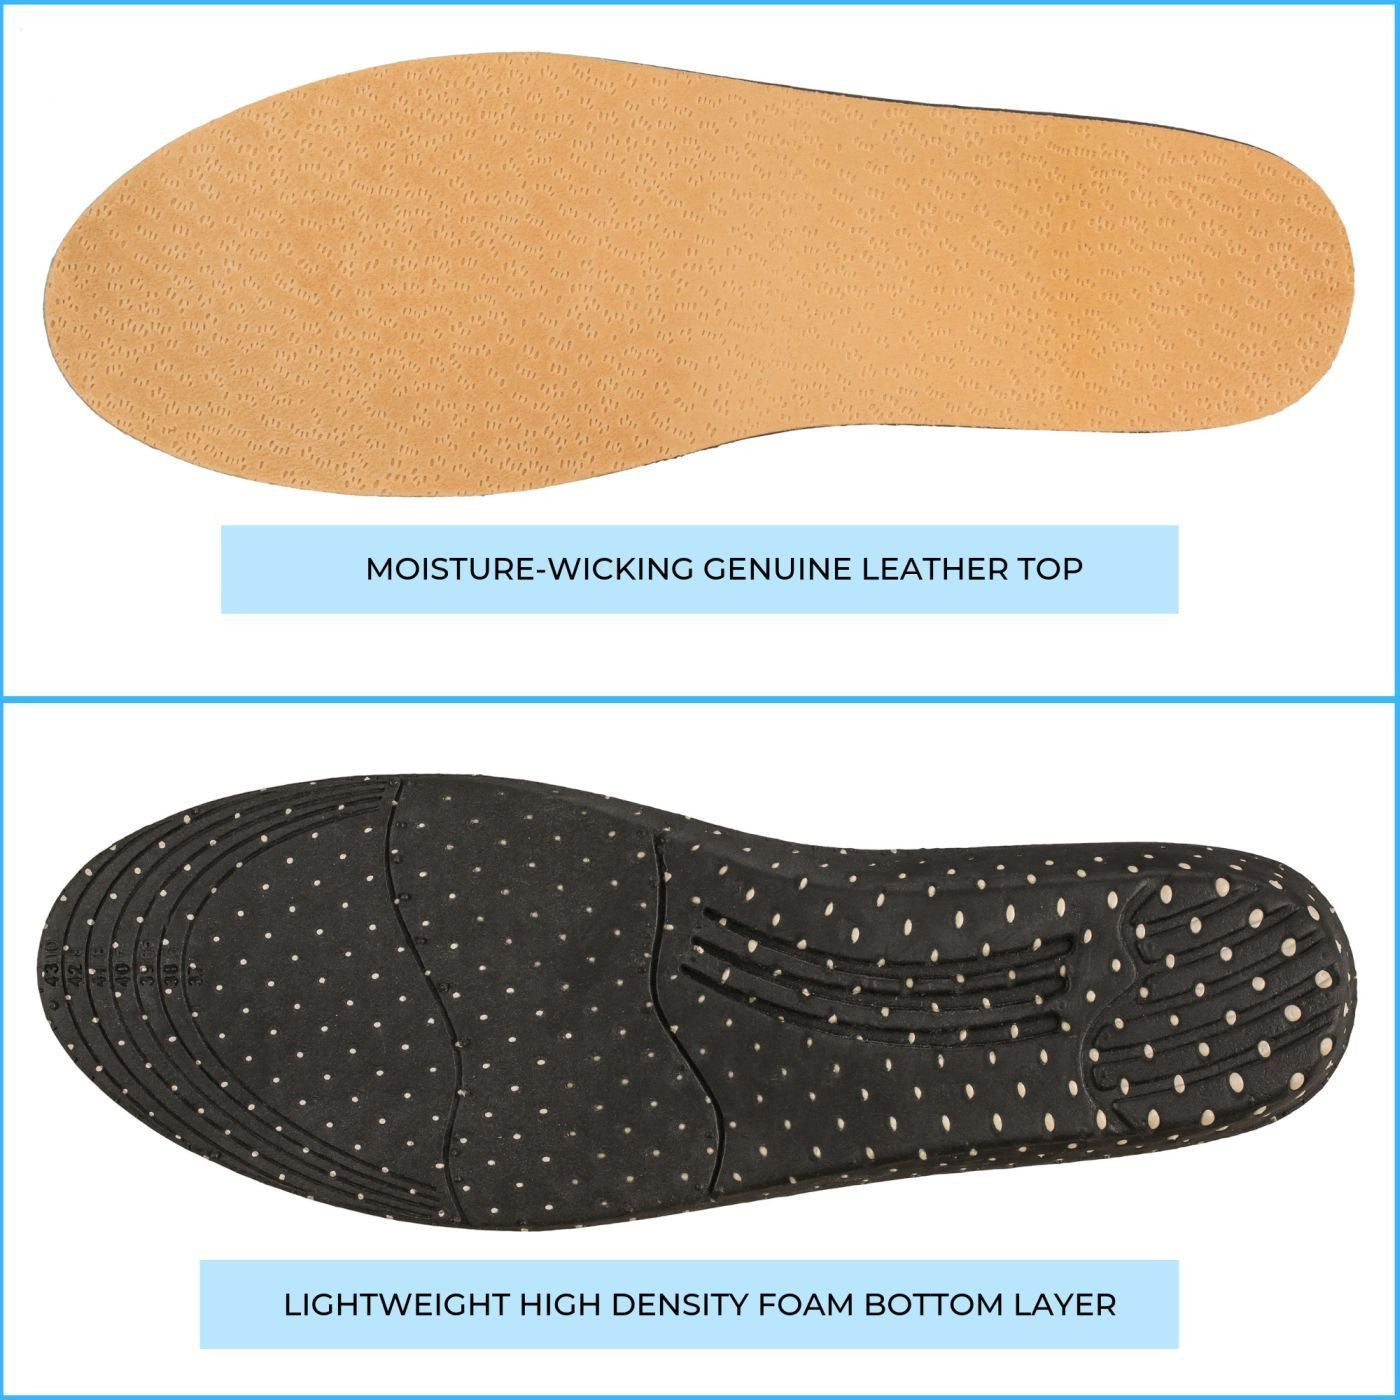 Elevator shoes height increase Sheep Leather Height Increase Elevator Insoles - 3.2 CM | 1.25 INCH Taller - IK303